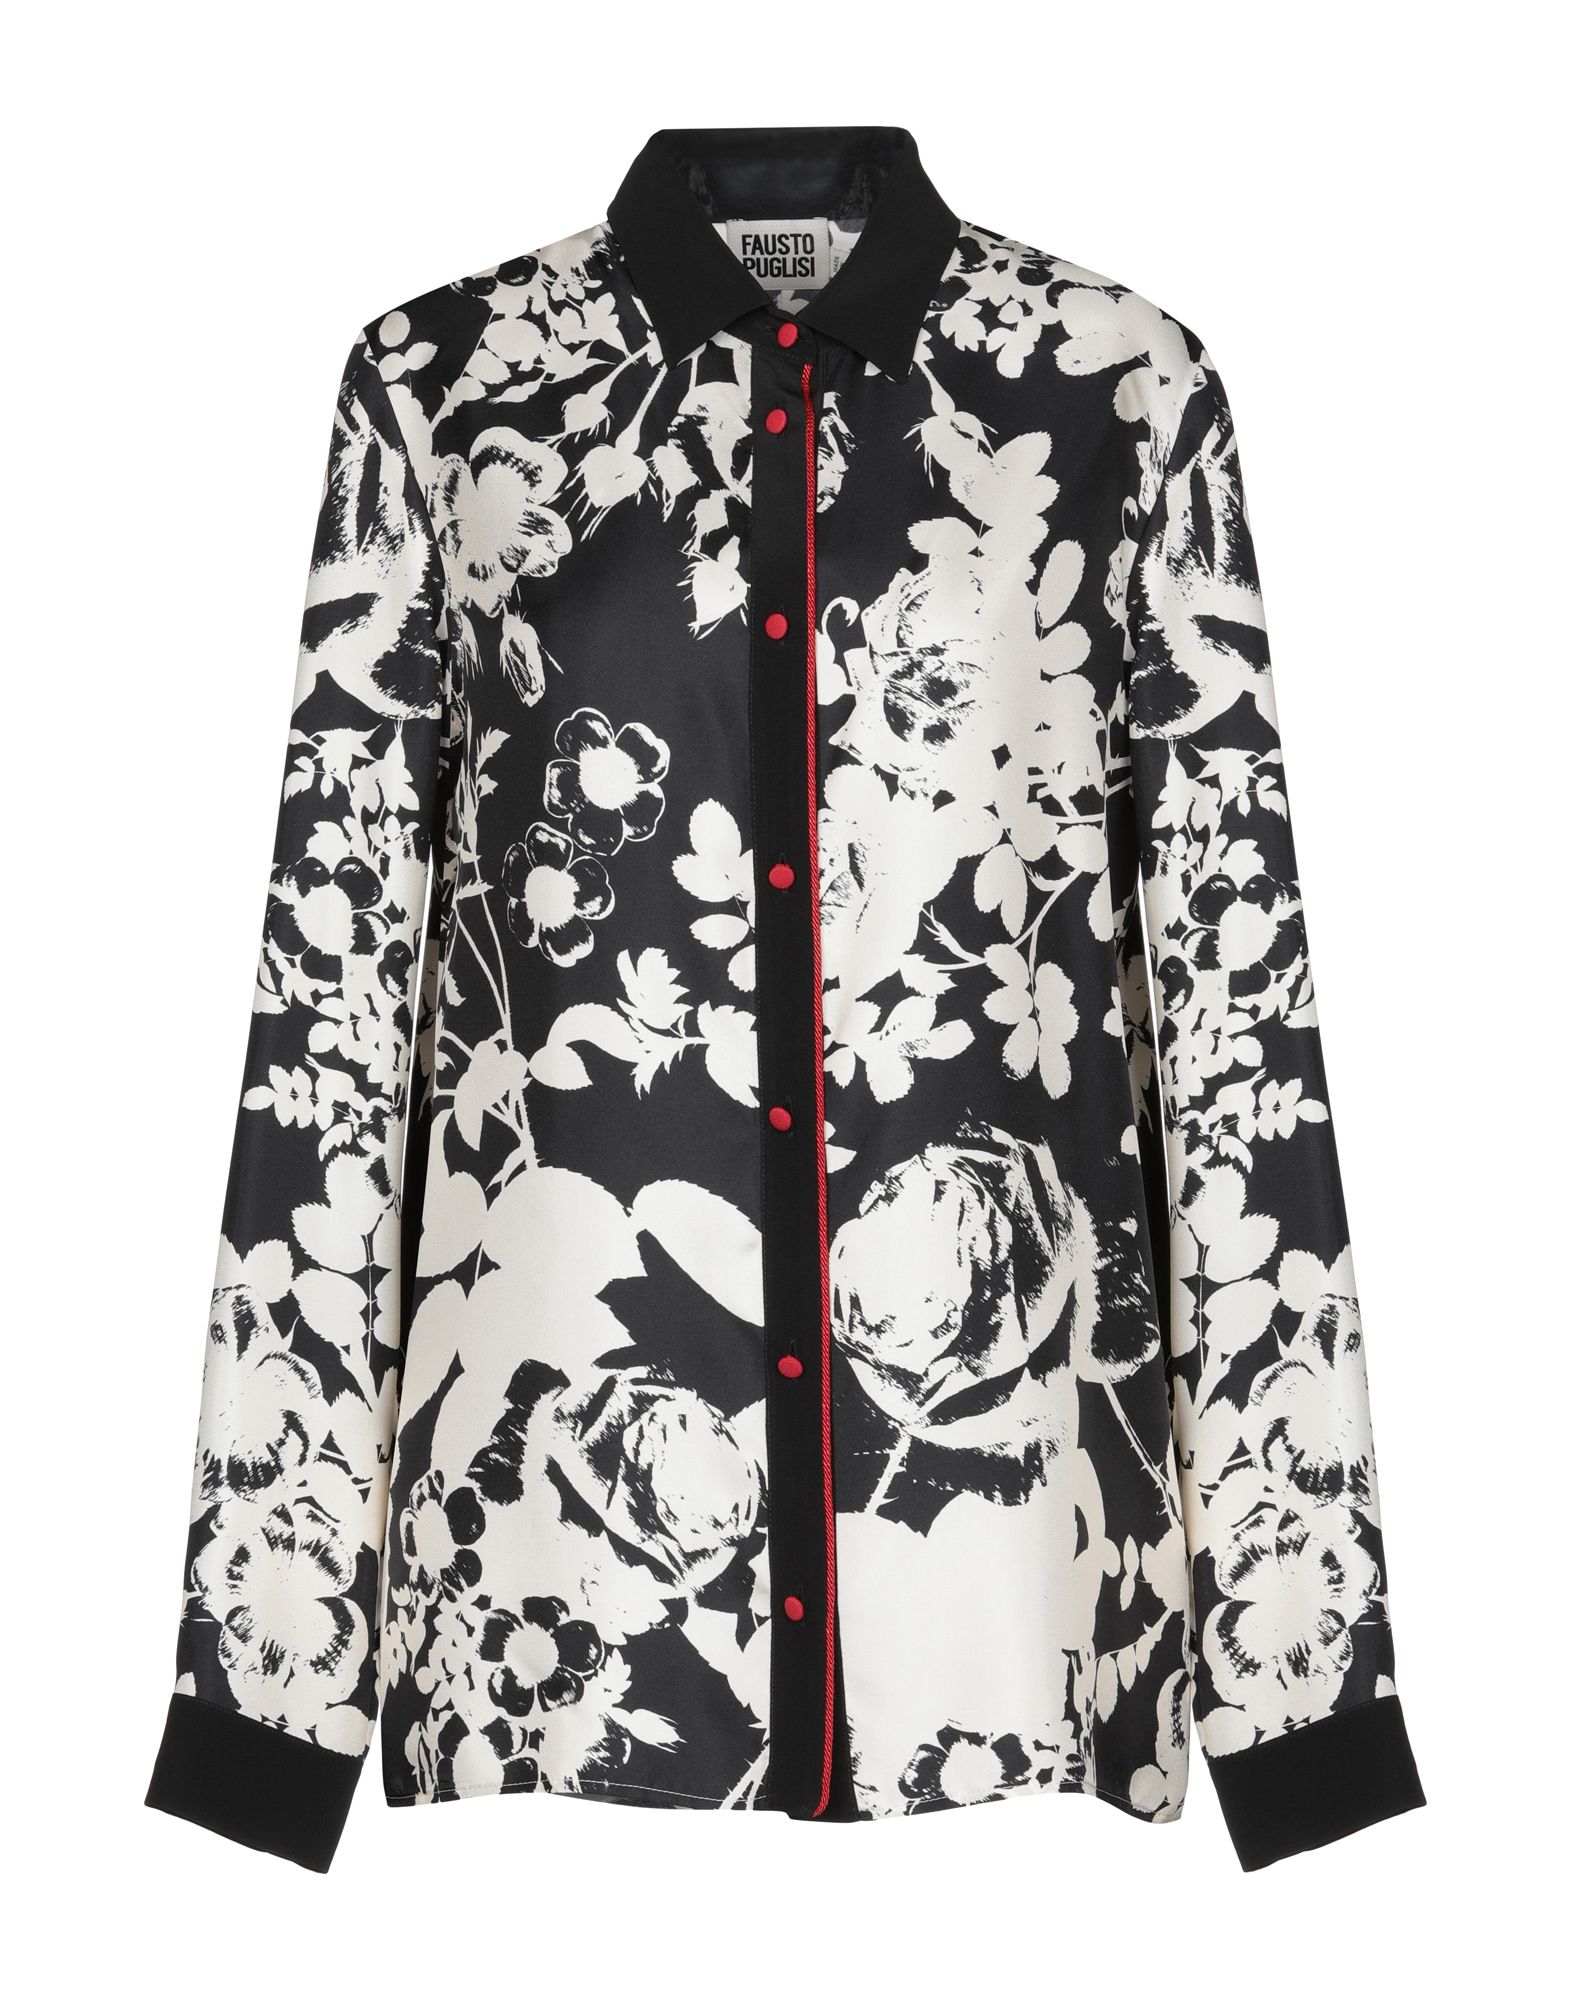 FAUSTO PUGLISI Floral shirts & blouses,38764948PL 6